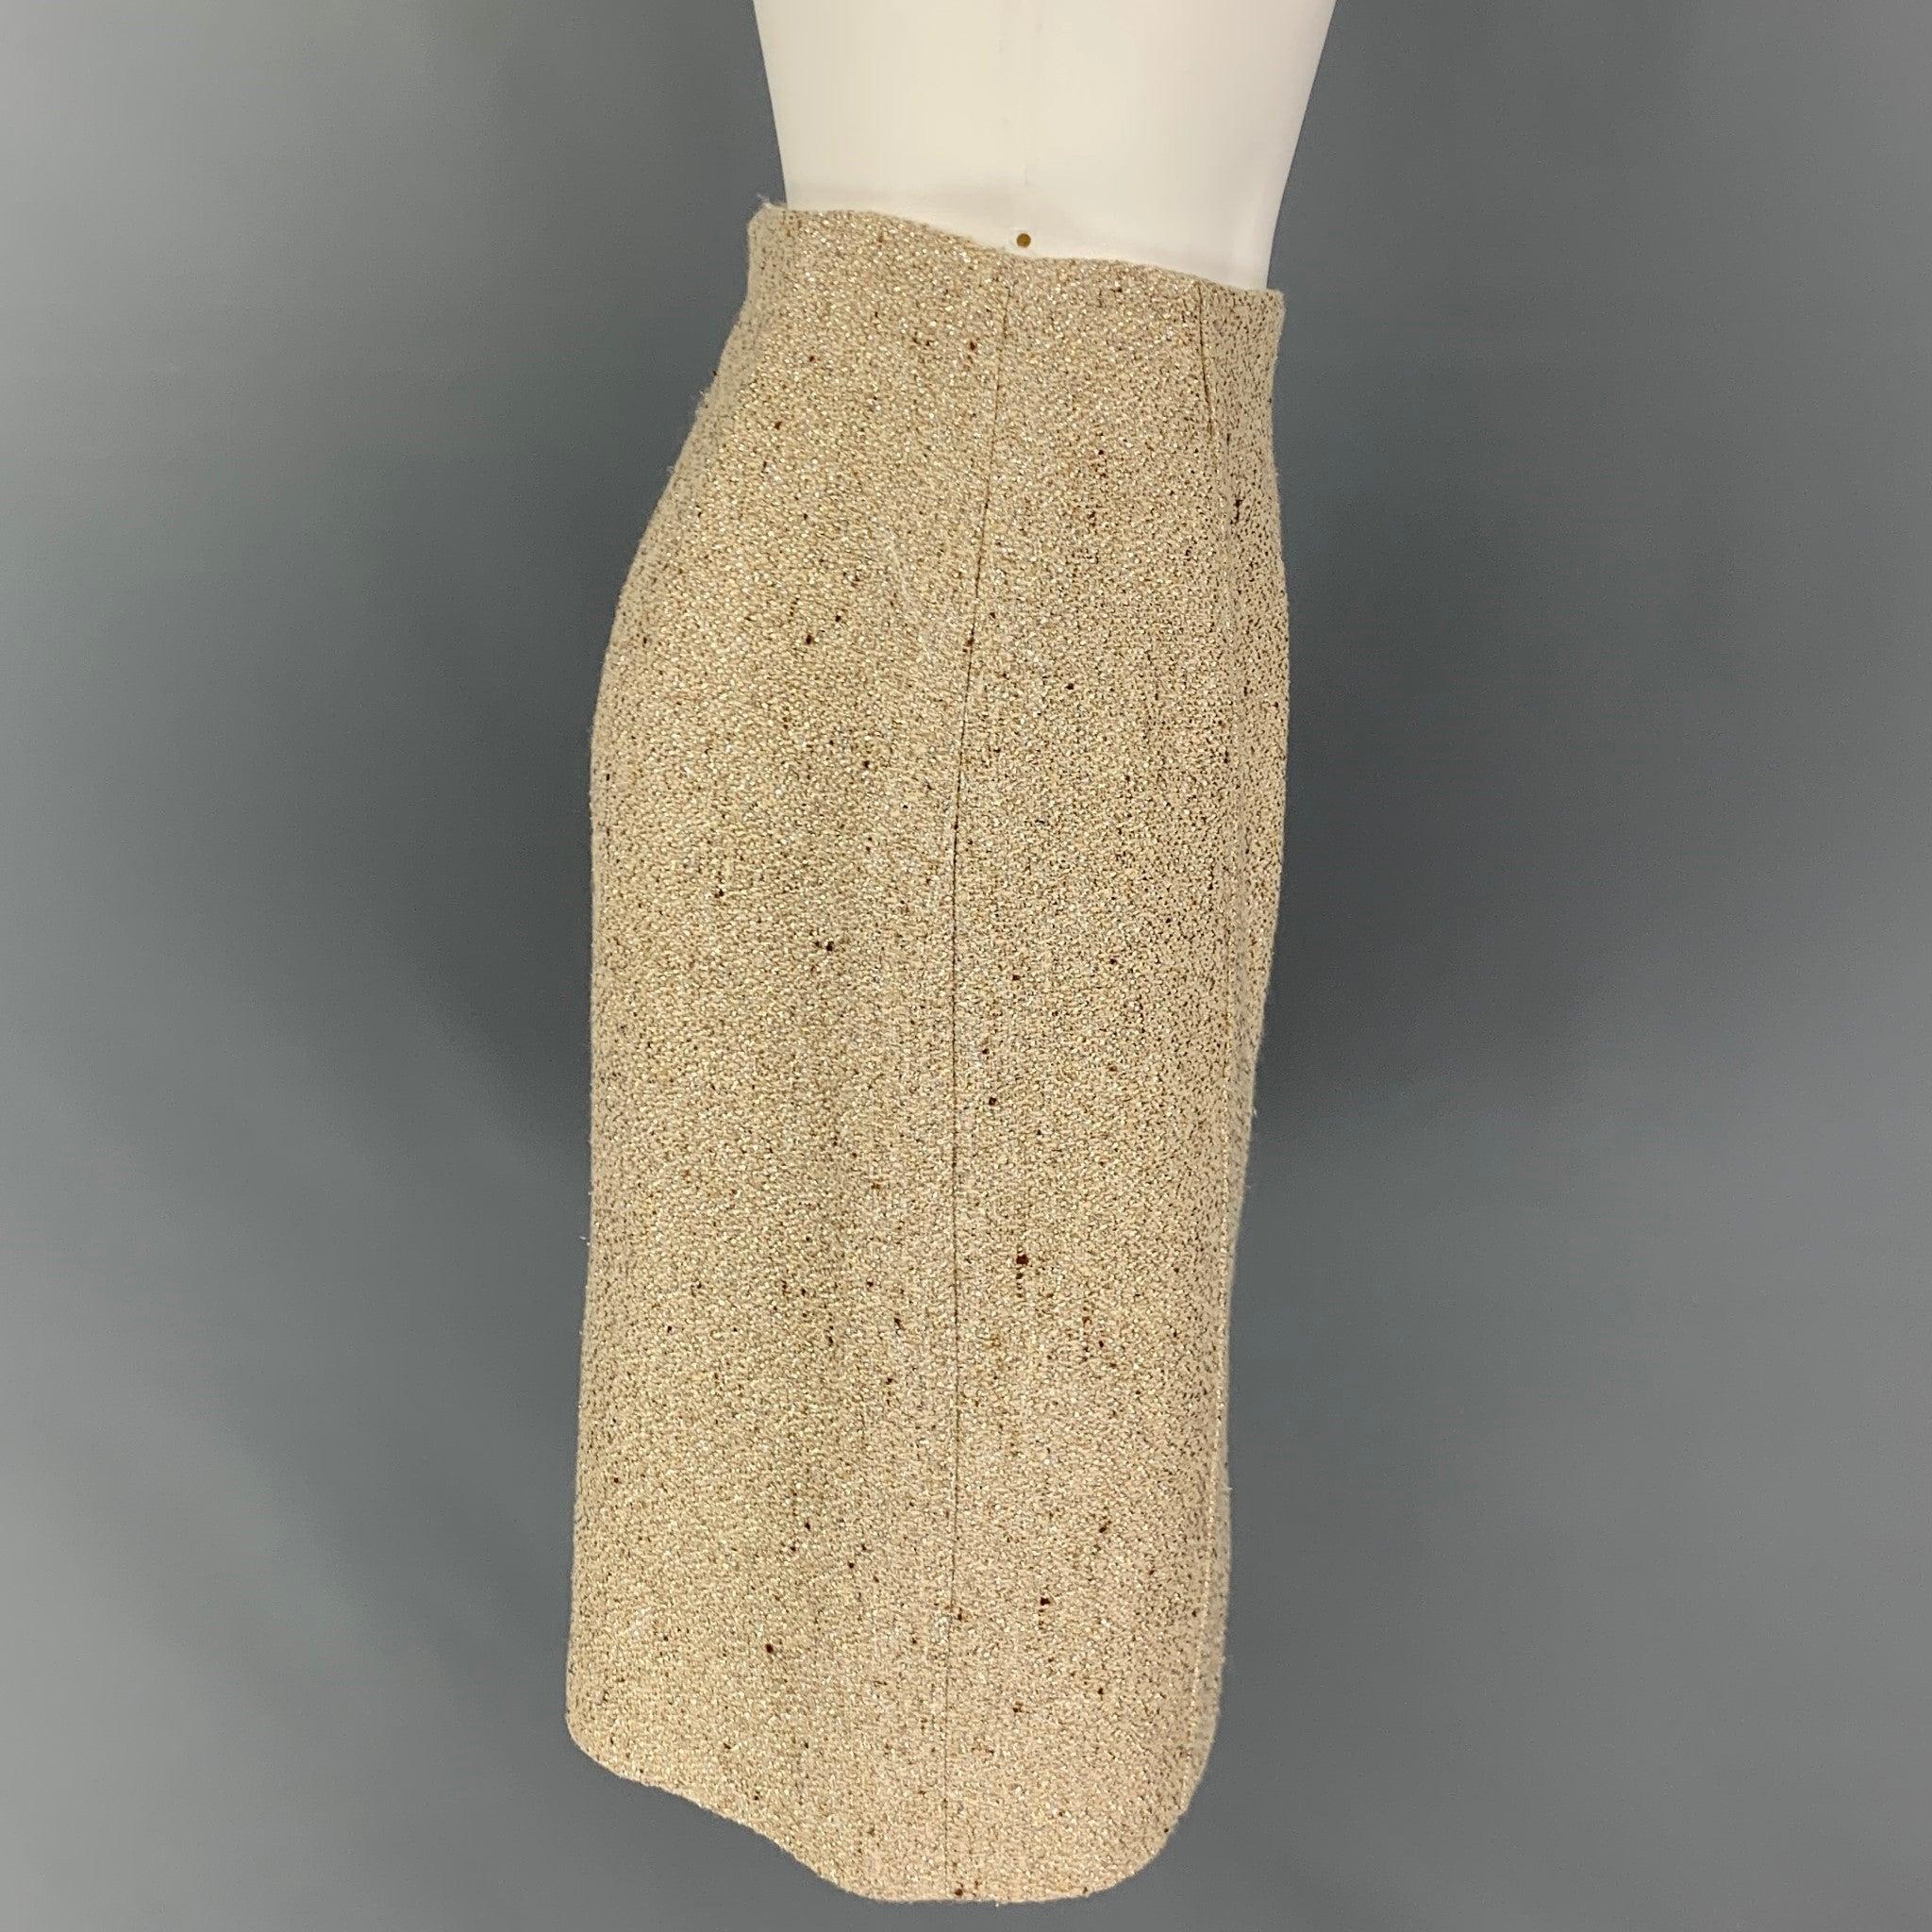 VALENTINO skirt comes in a gold textured boucle viscose blend with a slip liner featuring a pencil style, back slit, and a back zipper closure. Made in Italy.
Very Good
Pre-Owned Condition. 

Marked:   42/6 

Measurements: 
  Waist: 25 inches  Hip: